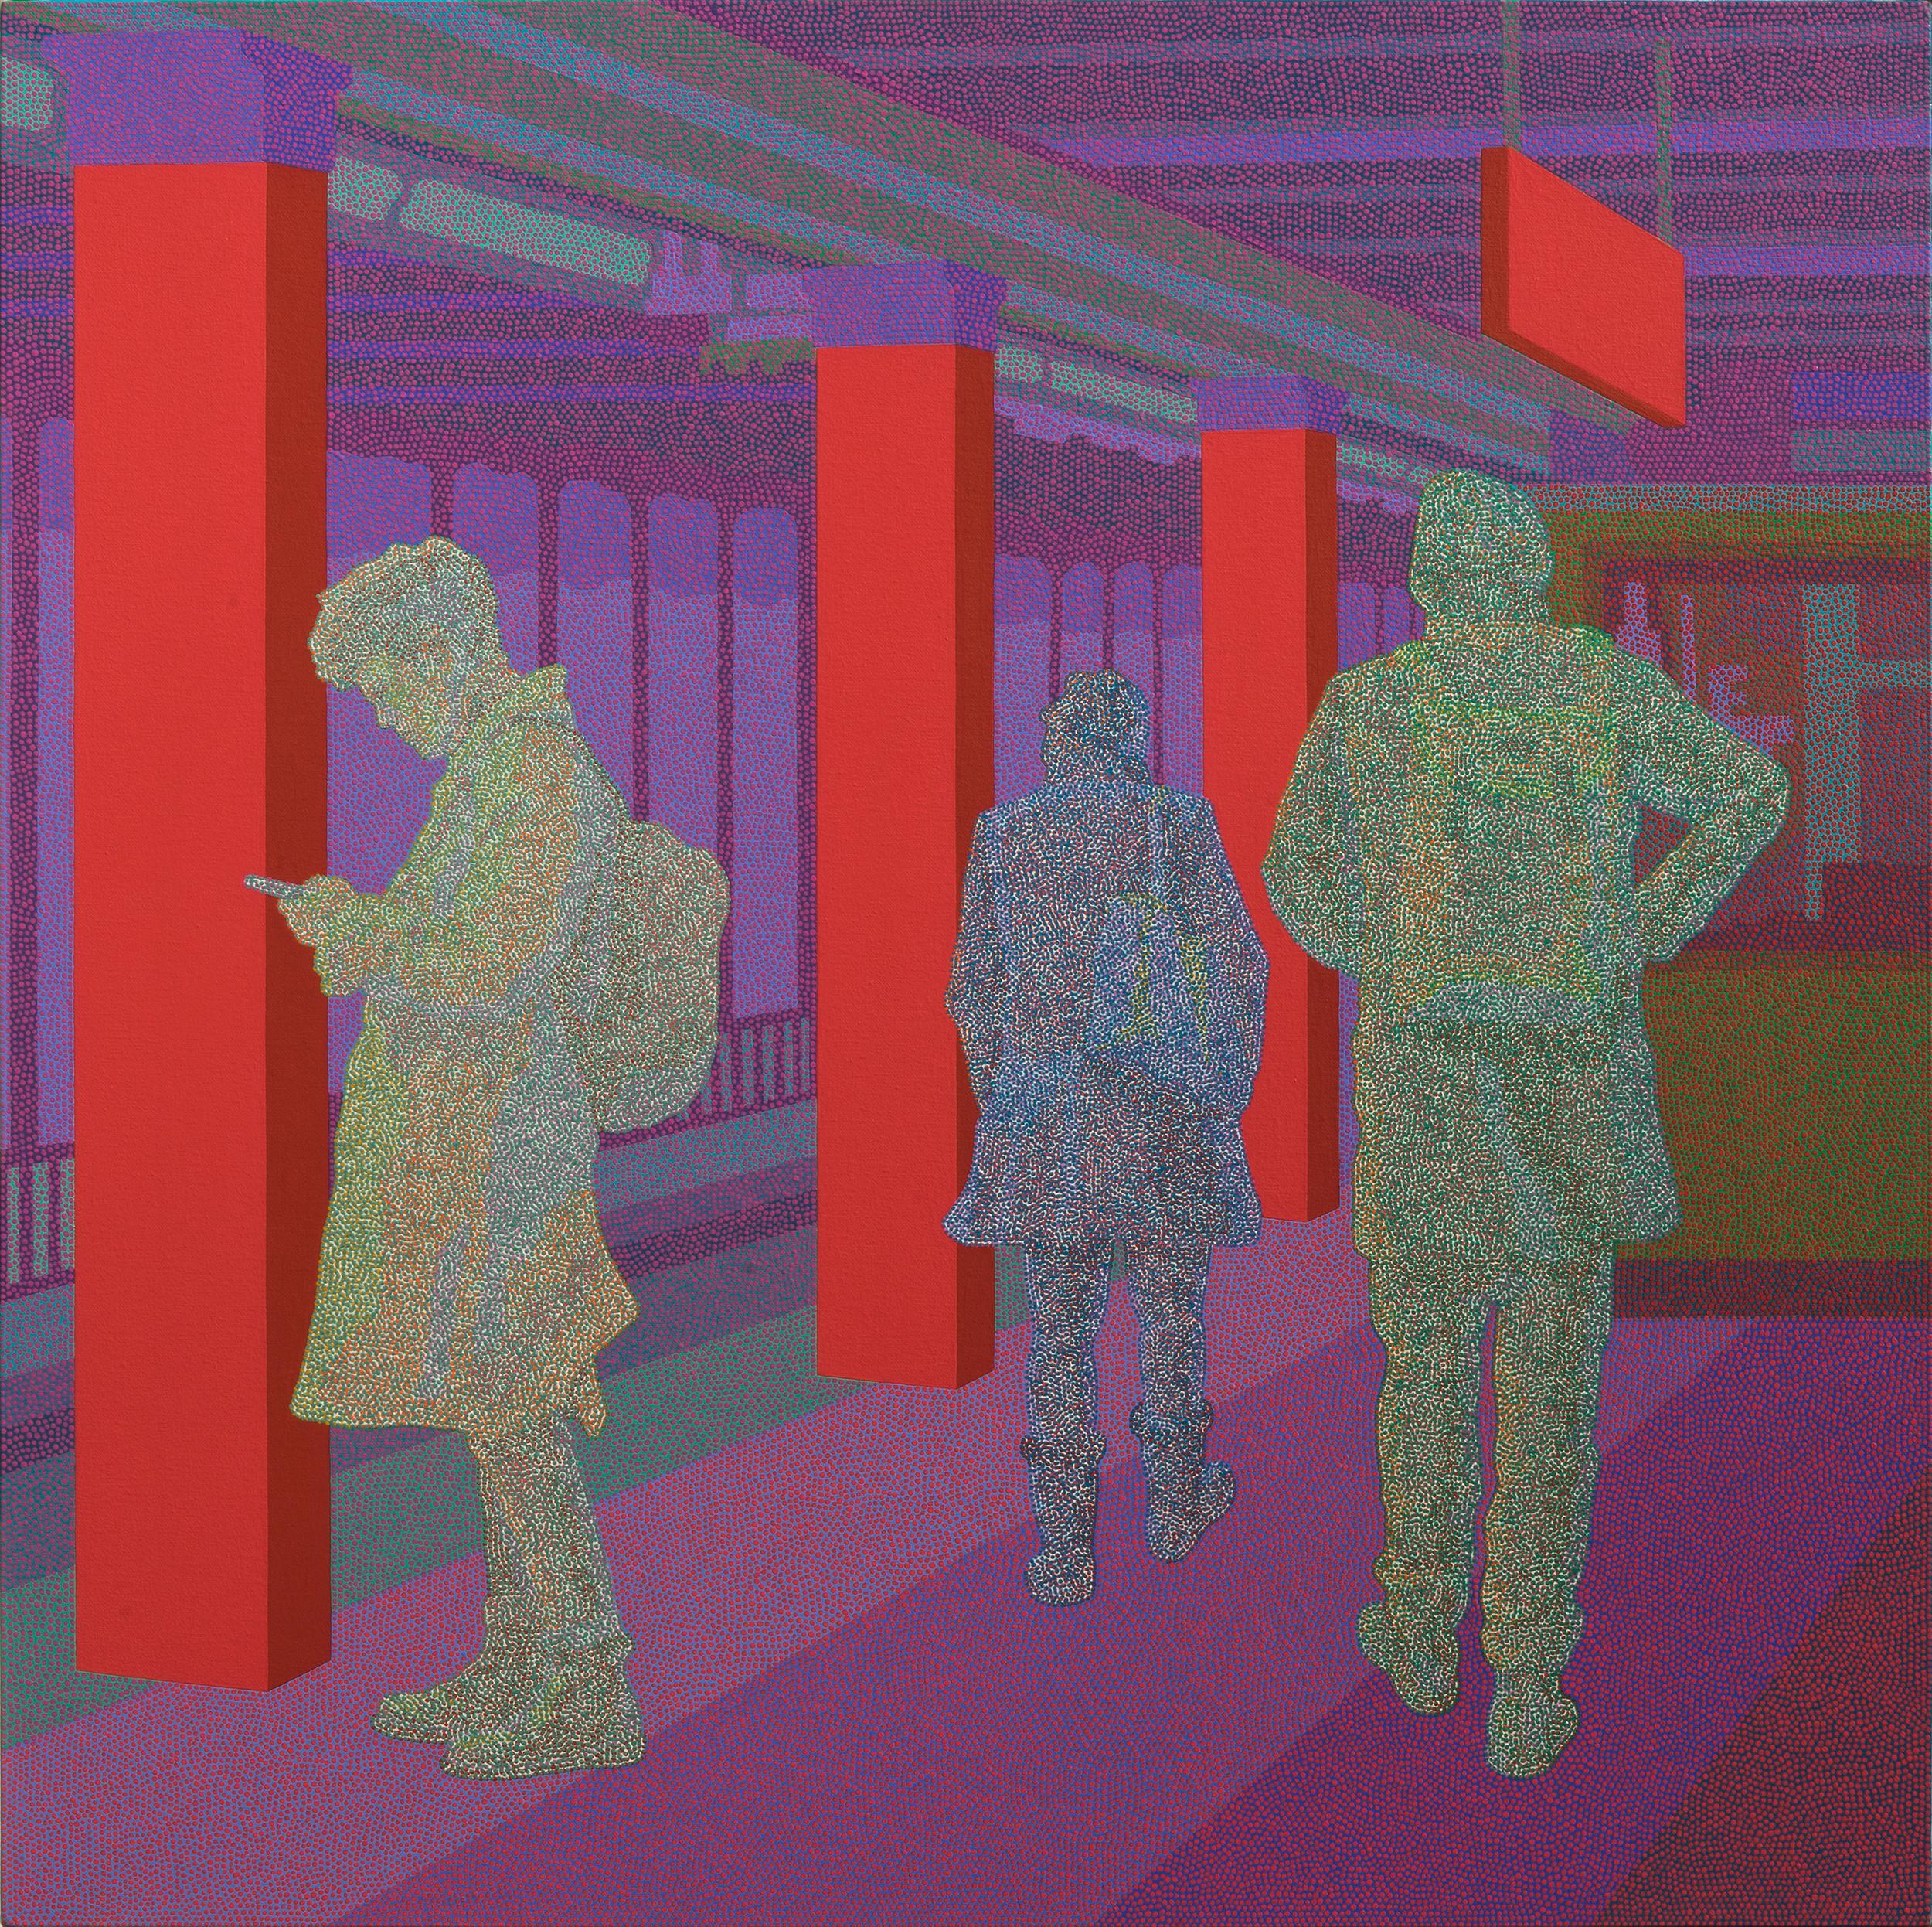 Hyoungseok Kim Figurative Painting - Ghost in the City - Subway, Original Painting